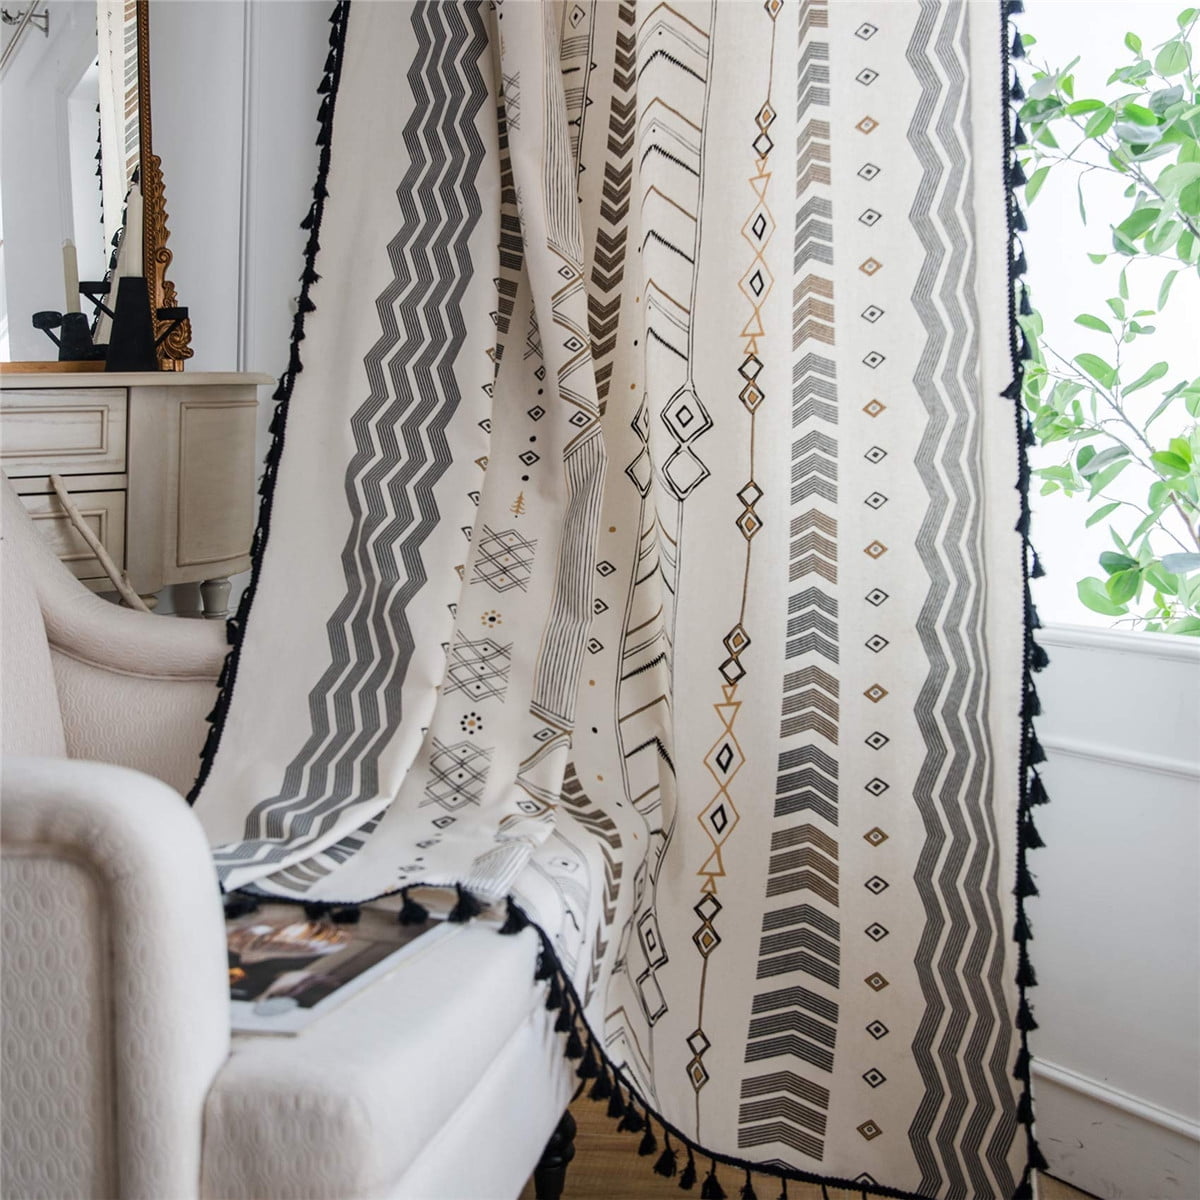 Details about   Bohemia Fashion Window Curtains Living Room Bedroom Blackout Drapes Treatment 